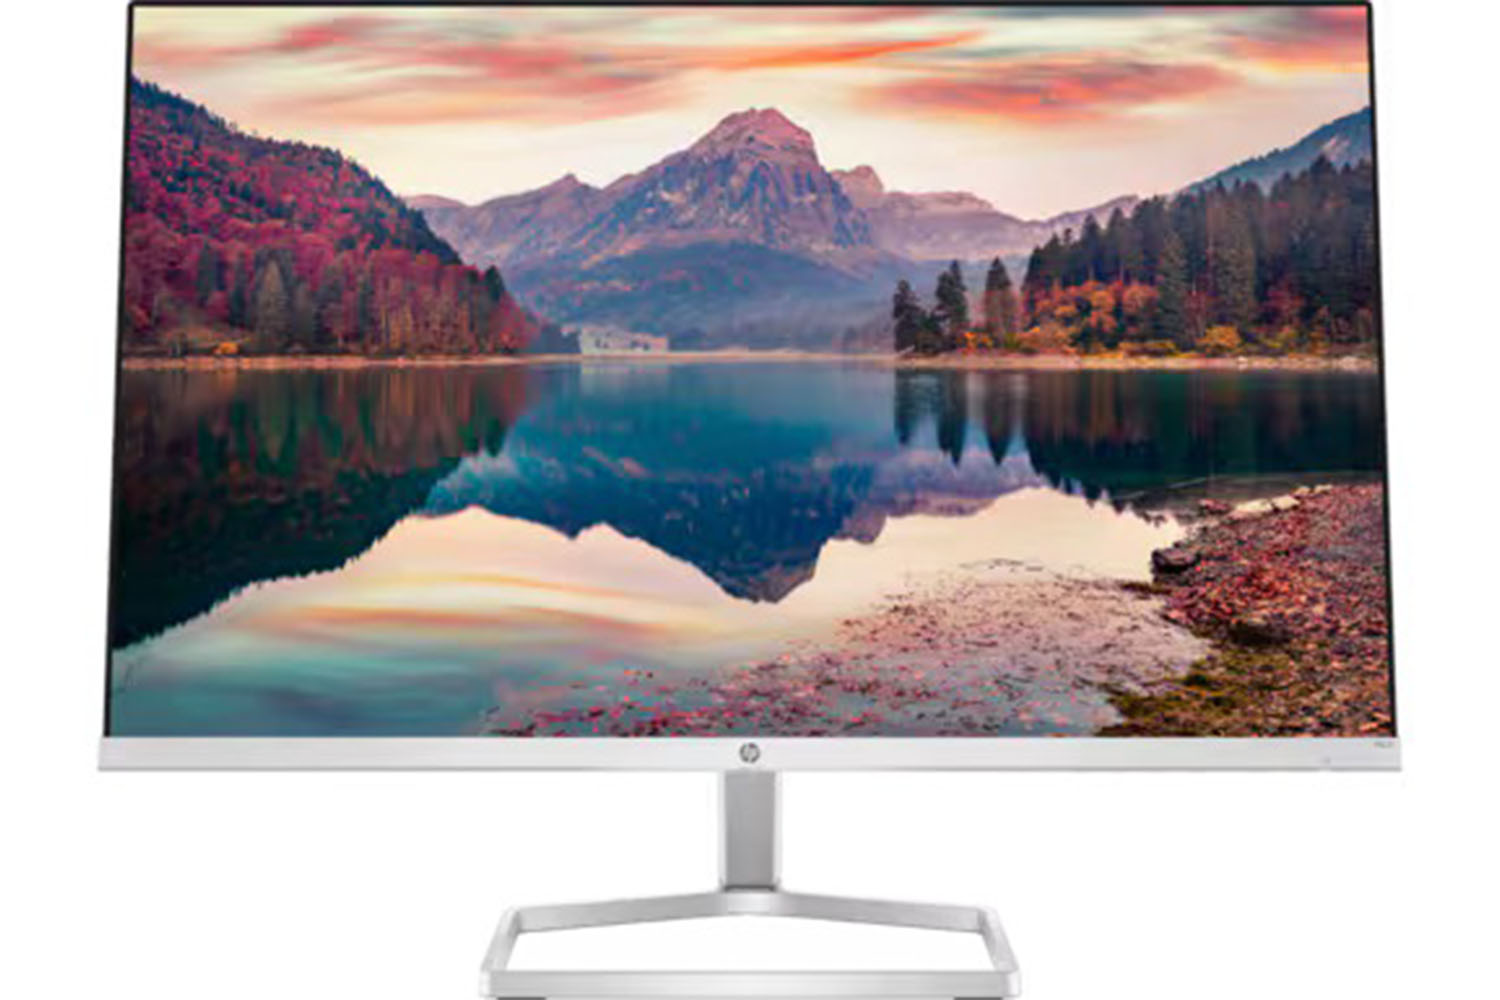 A HP M22f 22-inch monitor on a white background.